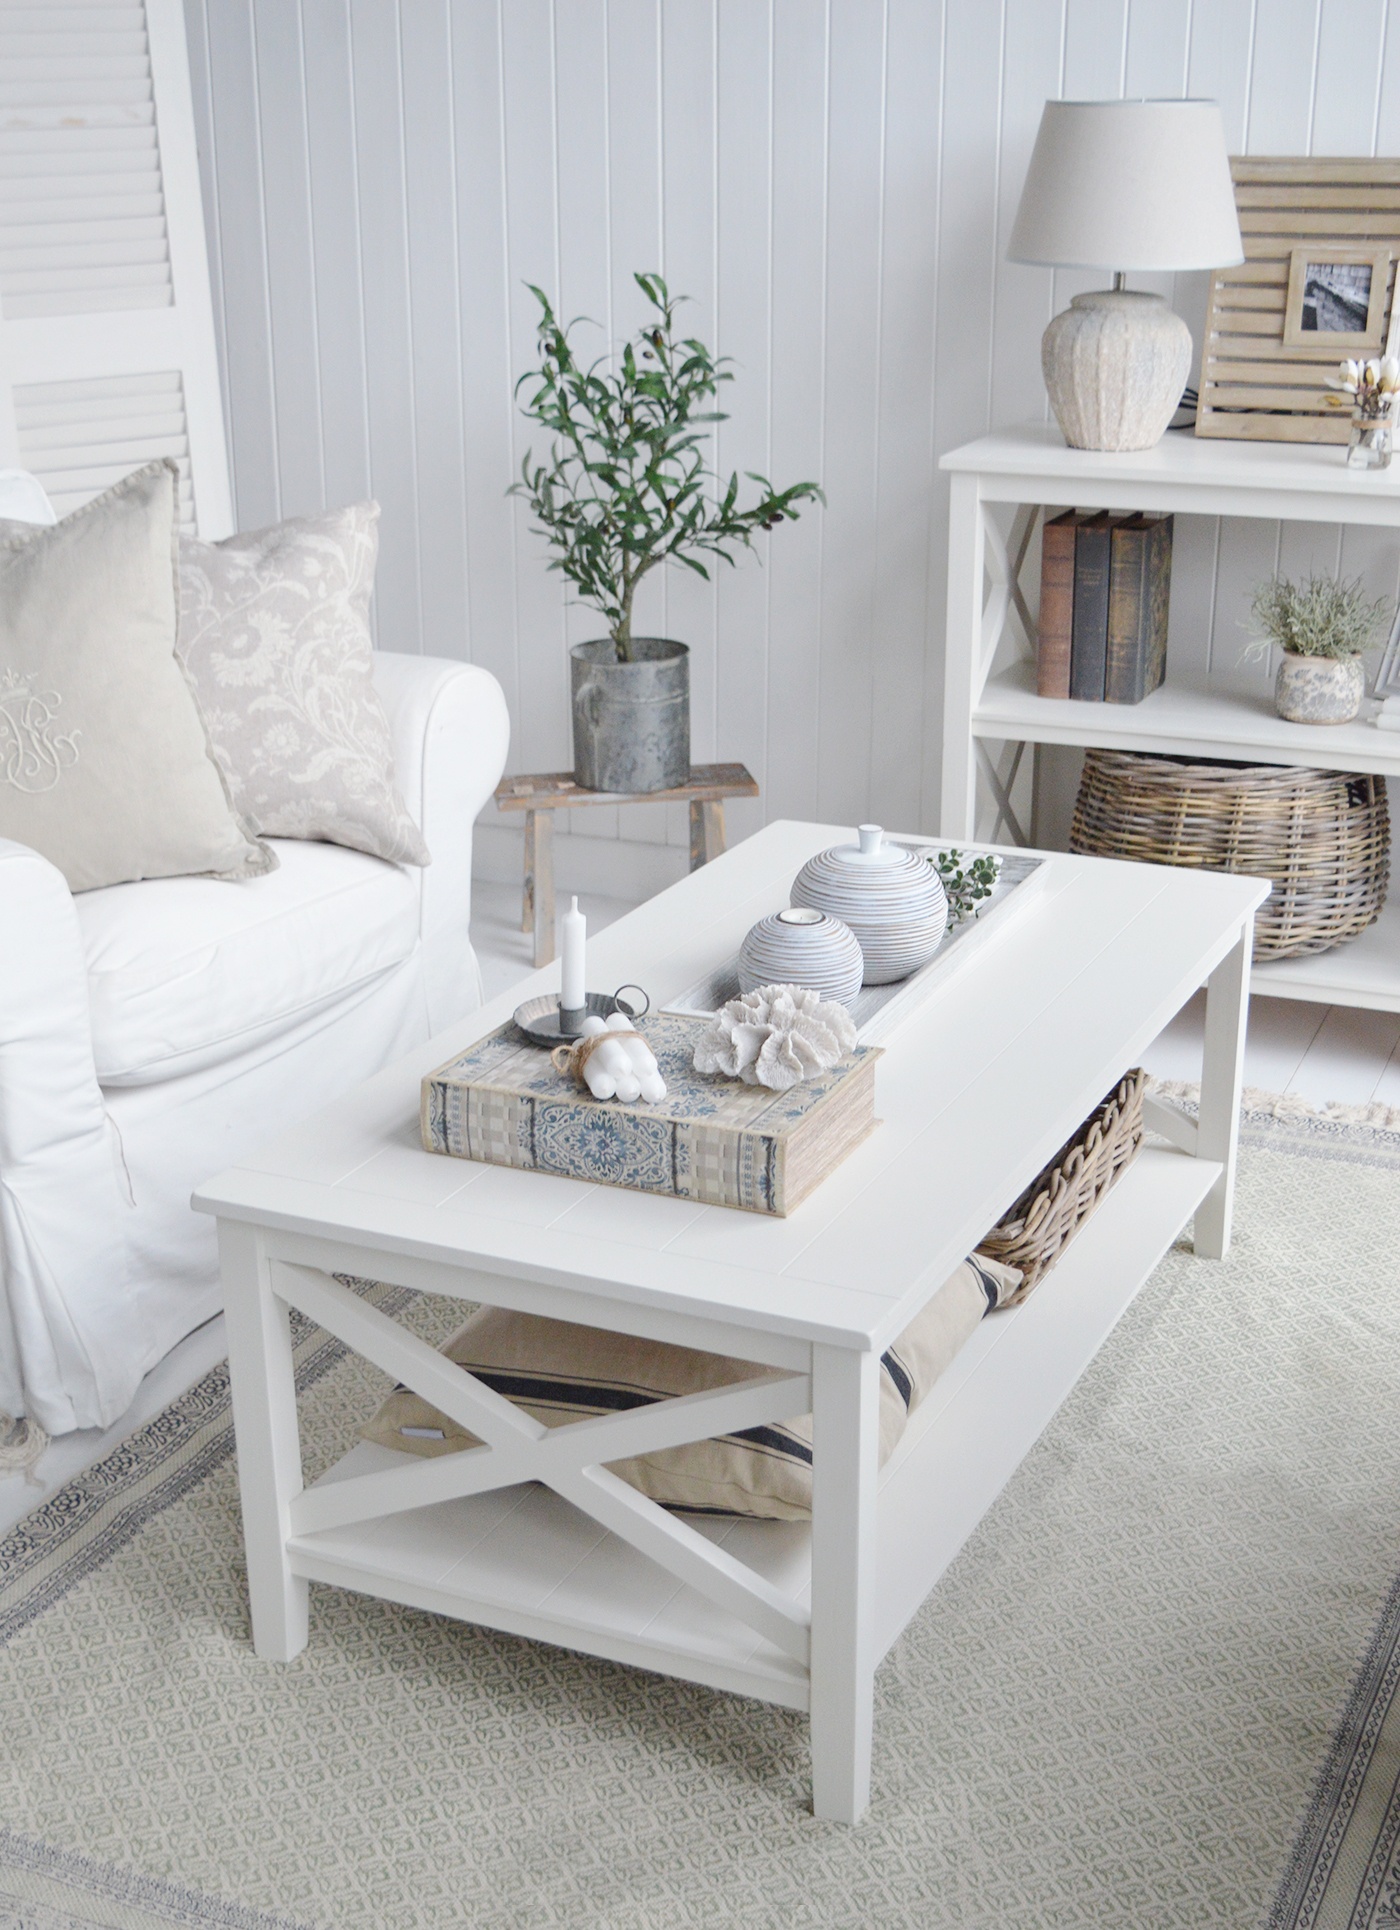 Cambridge ivory coffee table. A traditional style of coffee table with a shelf and clapboard finish to give a traditional coastal feel. With pleanty of space to style and the extra underneath storage, the Cambridge is a great choice